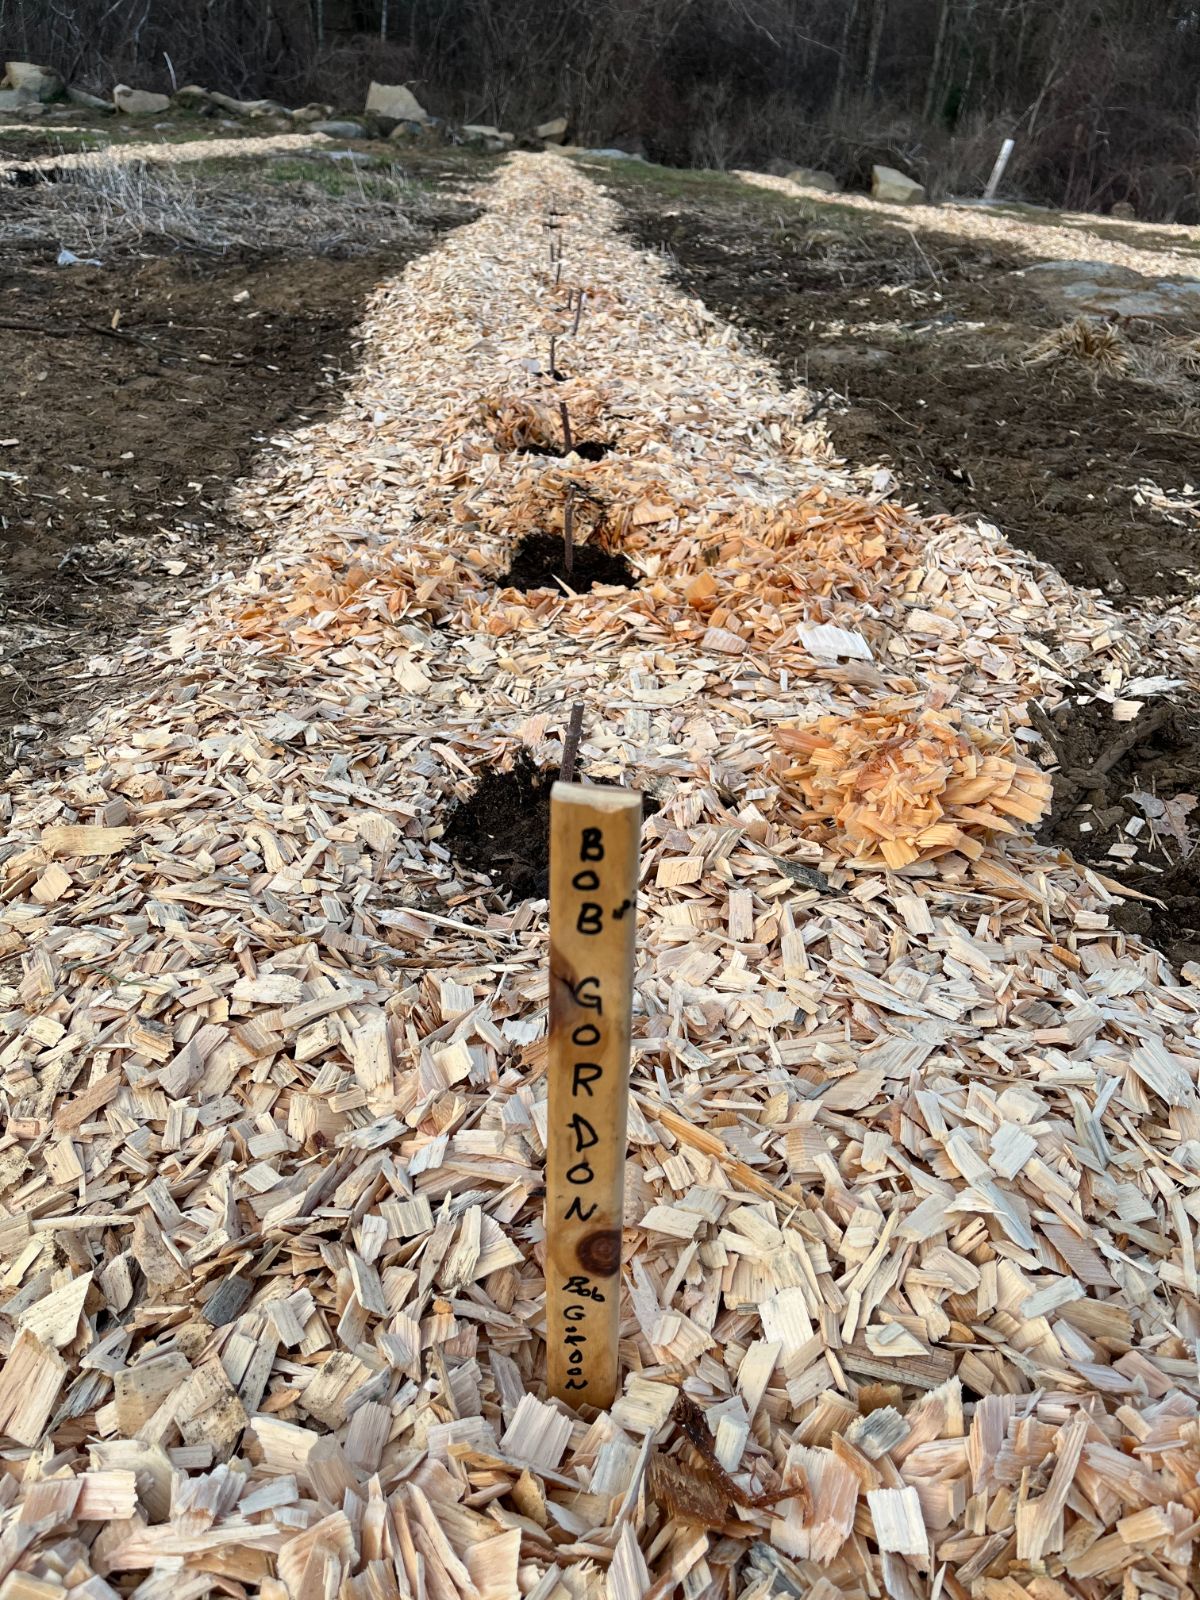 Wood chips laid as muclh